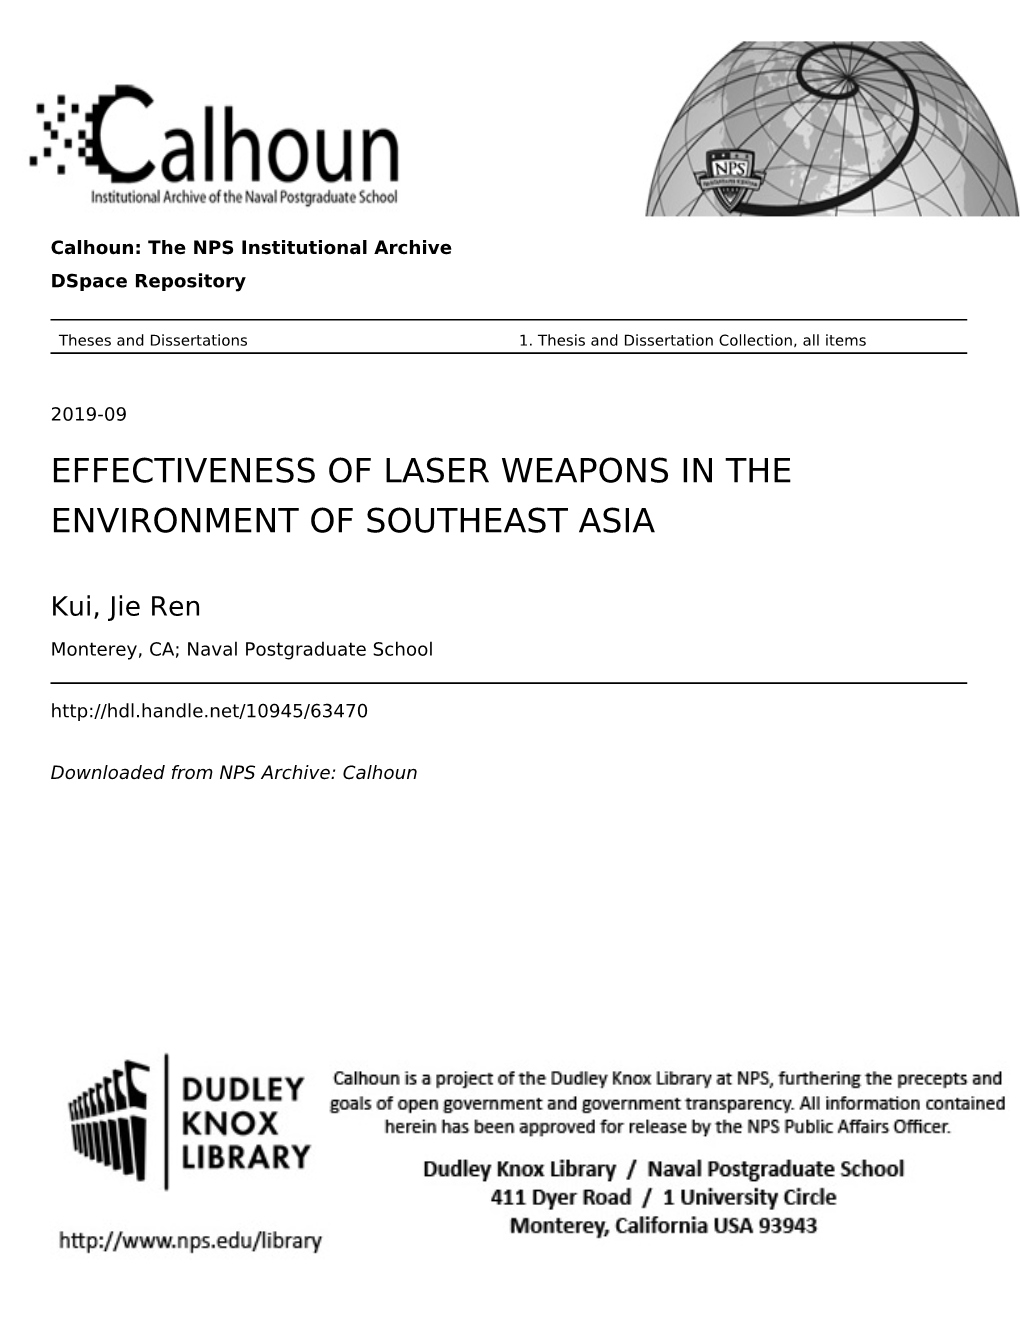 Effectiveness of Laser Weapons in the Environment of Southeast Asia